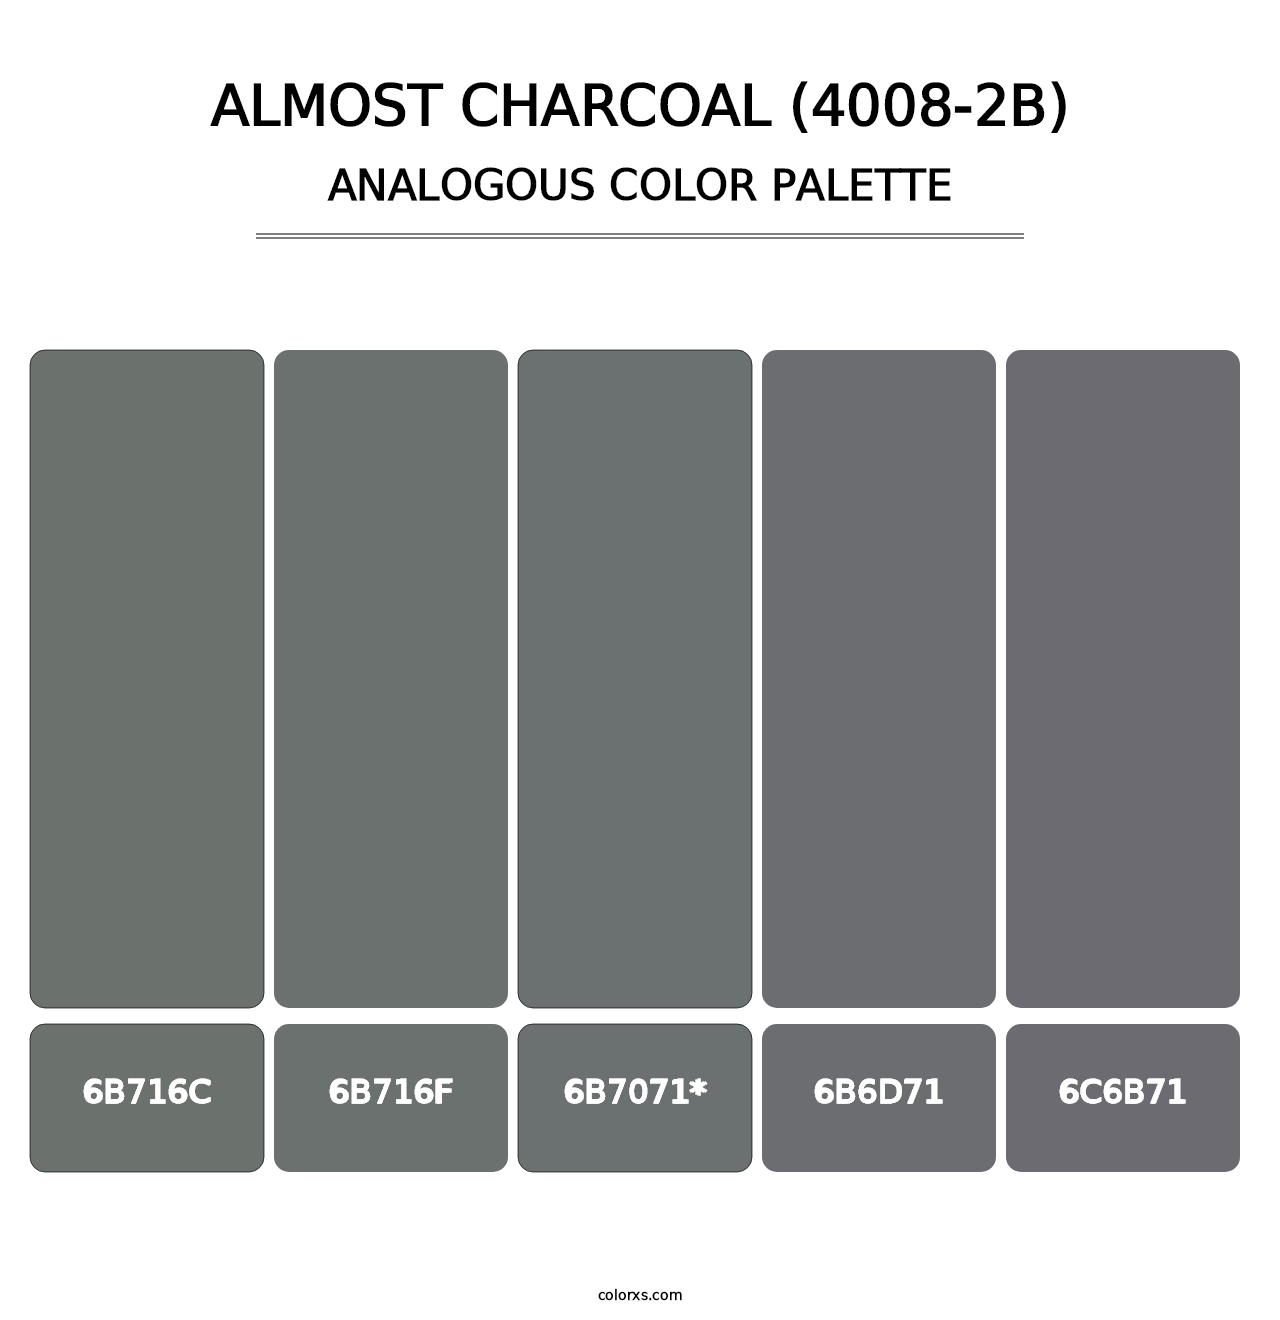 Almost Charcoal (4008-2B) - Analogous Color Palette